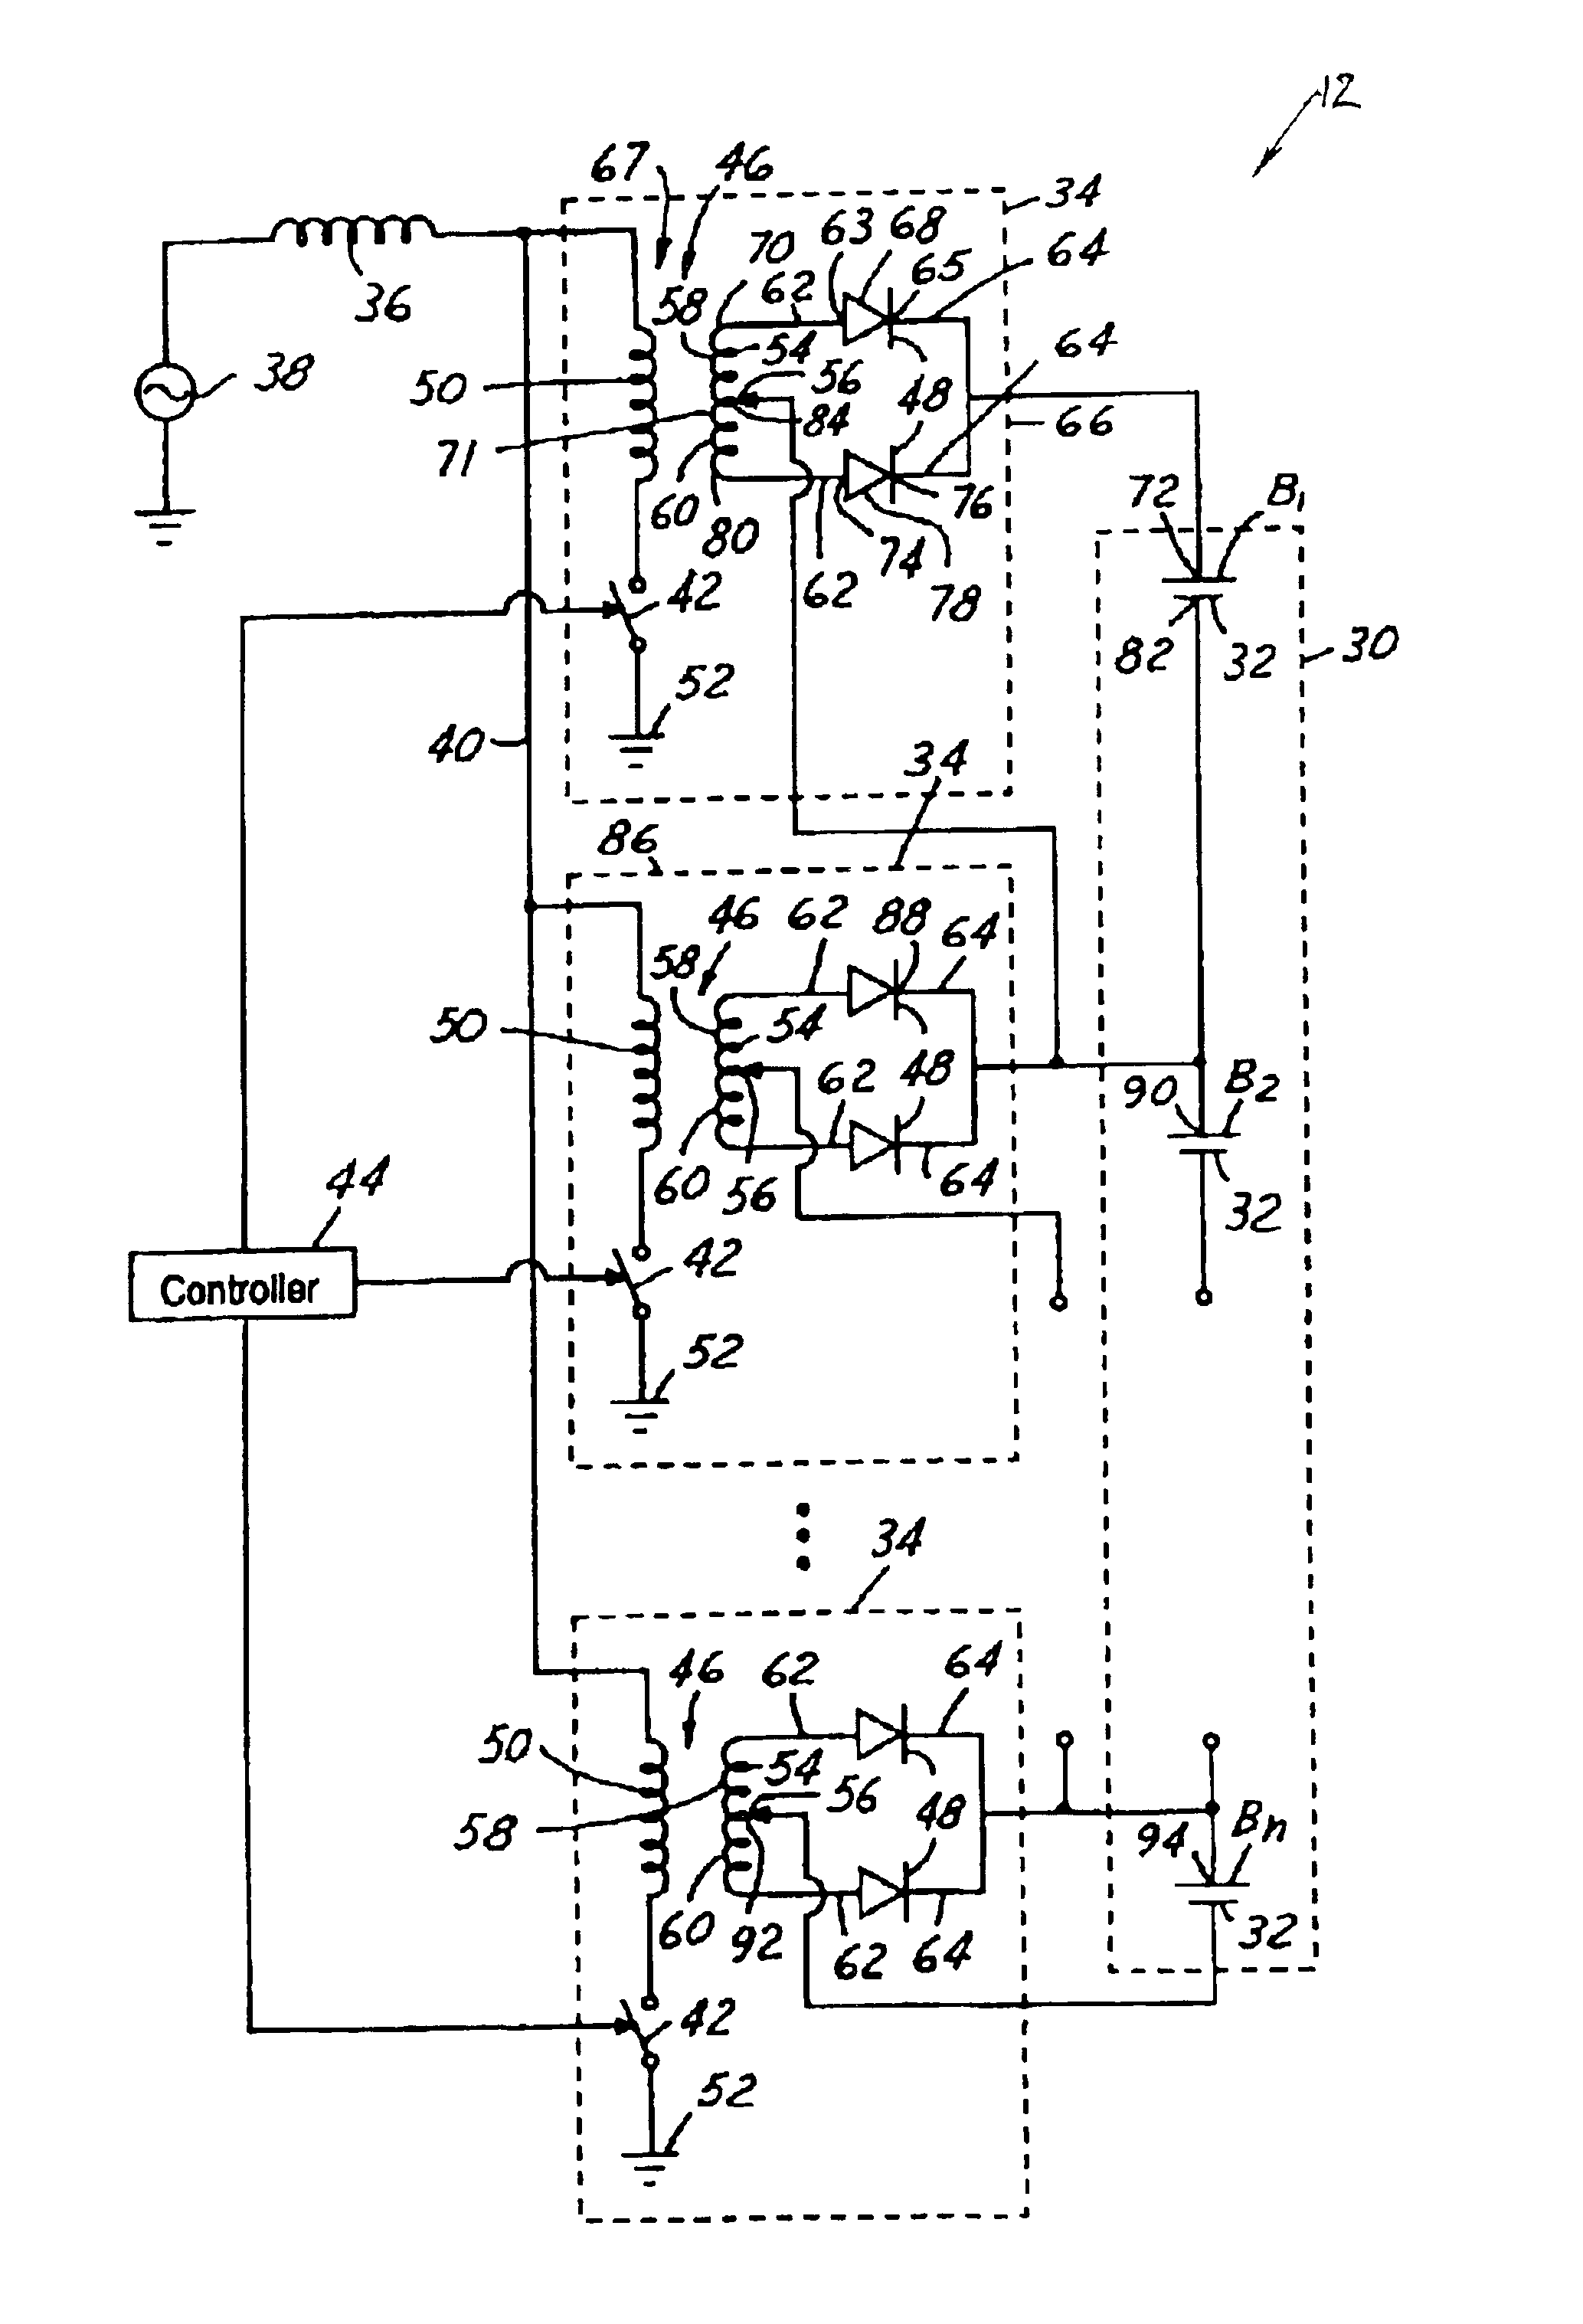 Battery cell balancing system